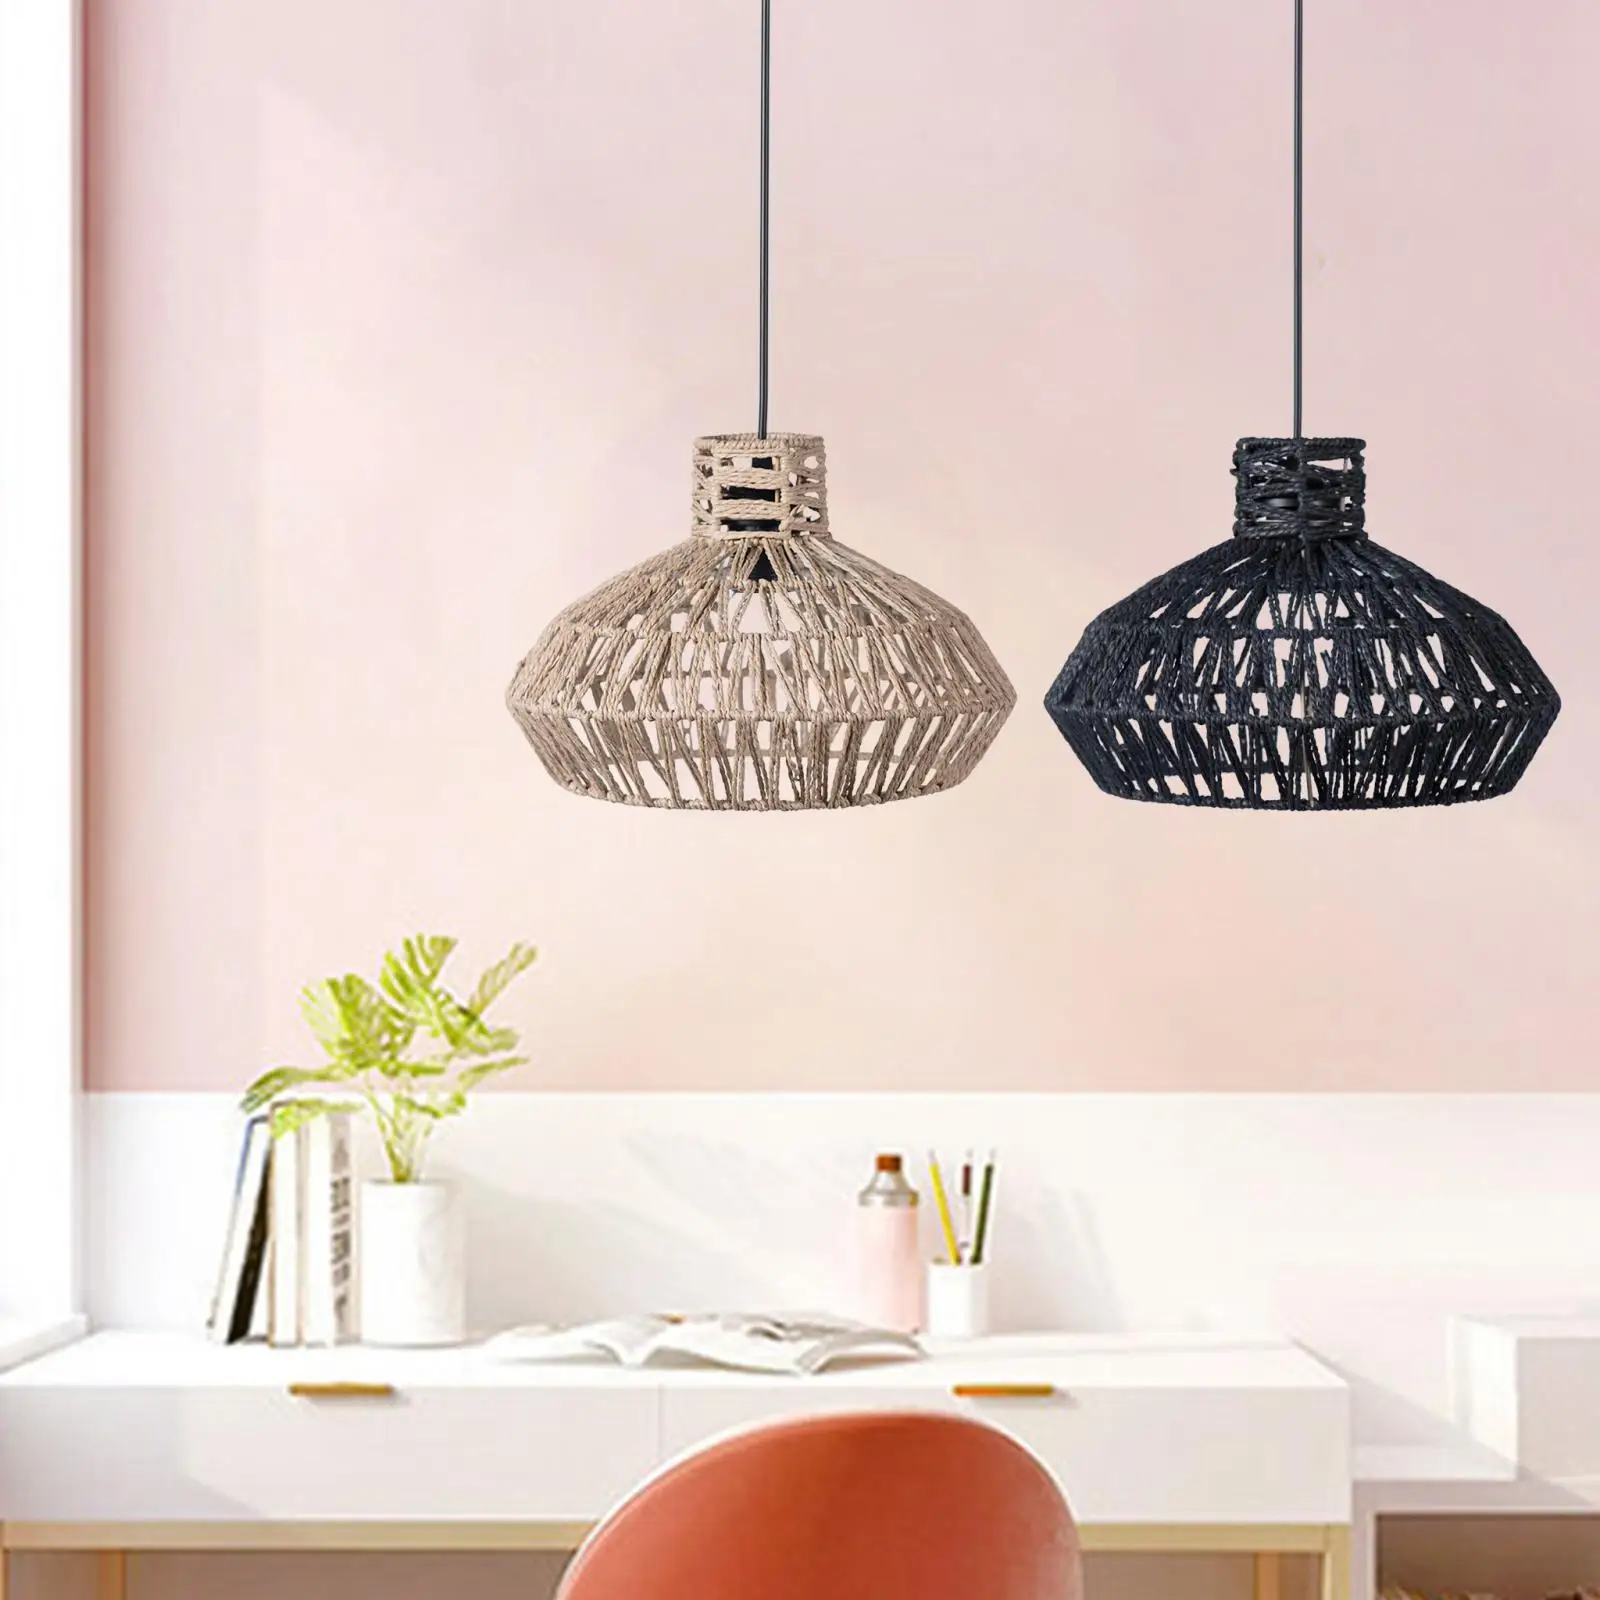 Weave Rope Lampshade Lamp Cover DIY Lighting Fixtures Light Shade for Kitchen Island Hallway Dining Room Living Room